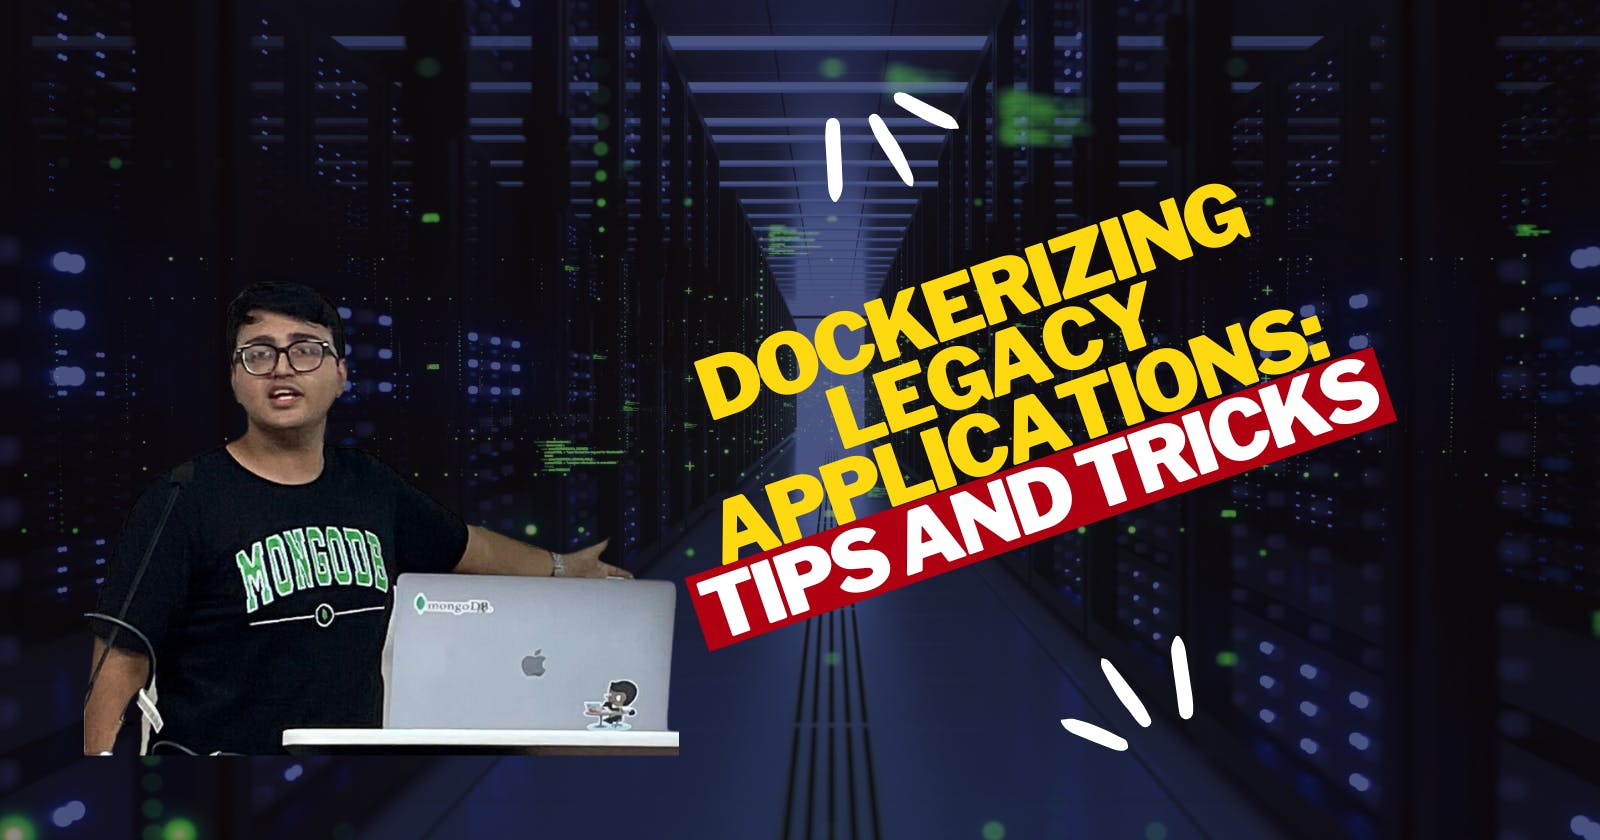 Dockerizing Legacy Applications: Tips and Tricks